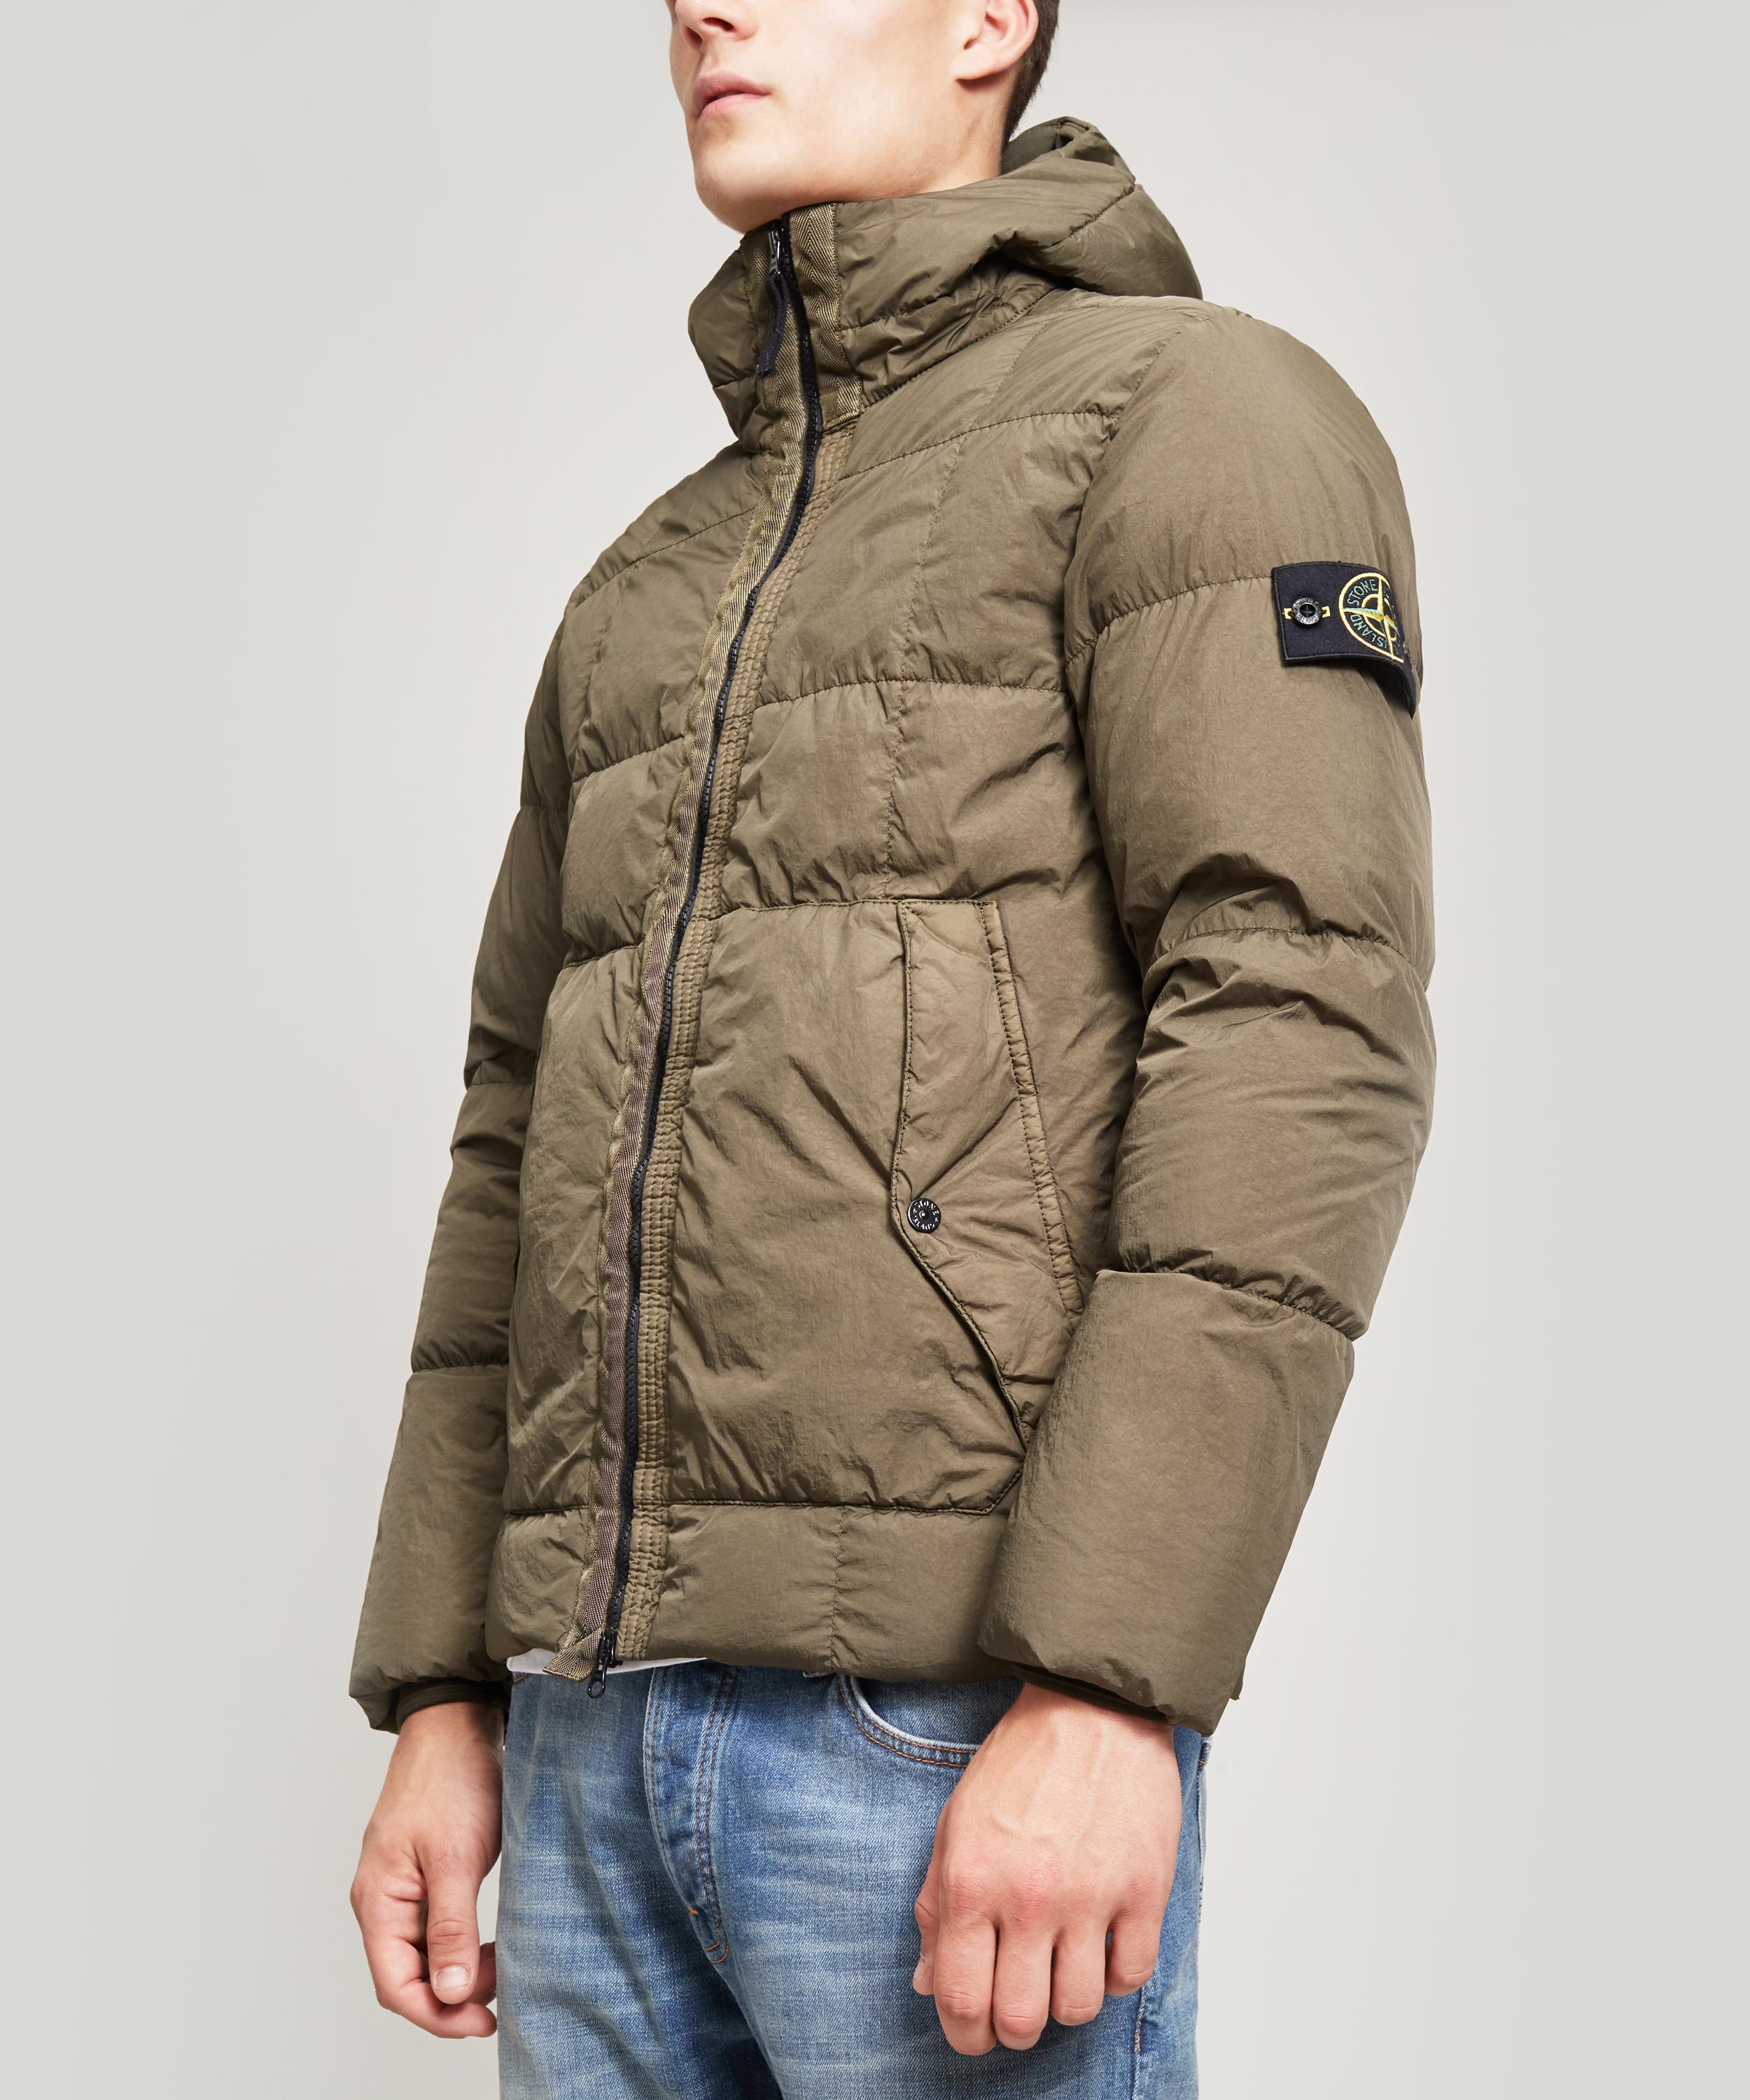 Stone Island Synthetic Crinkle Reps Ny Down Hooded Short Coat in Olive  (Green) for Men - Lyst